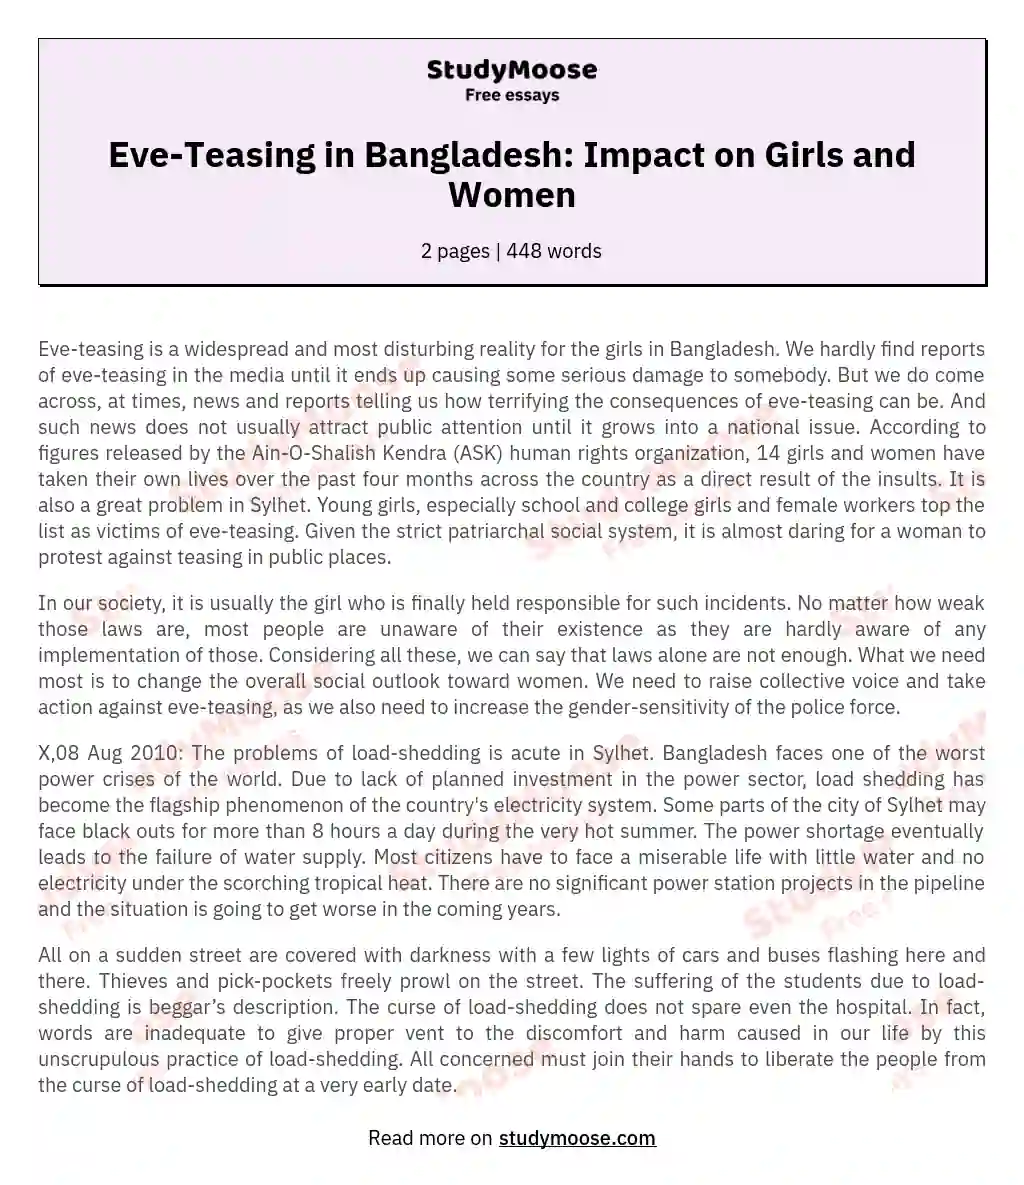 Eve-Teasing in Bangladesh: Impact on Girls and Women essay